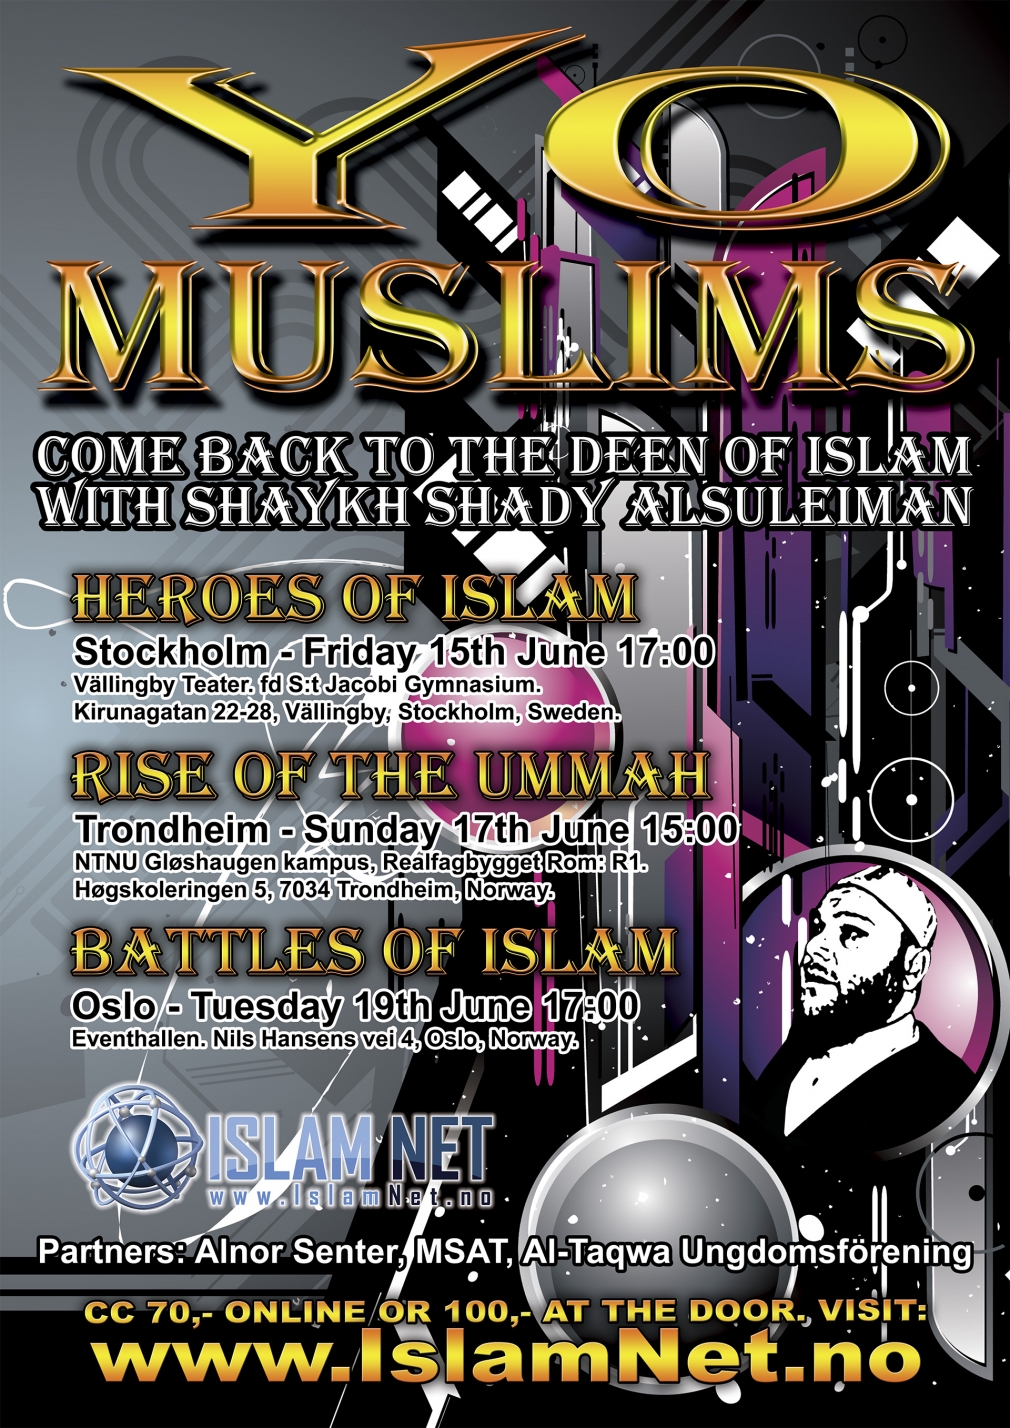 Yo Muslims, Come Back to The Deen of Islam With Shaykh Shady Alsuleiman